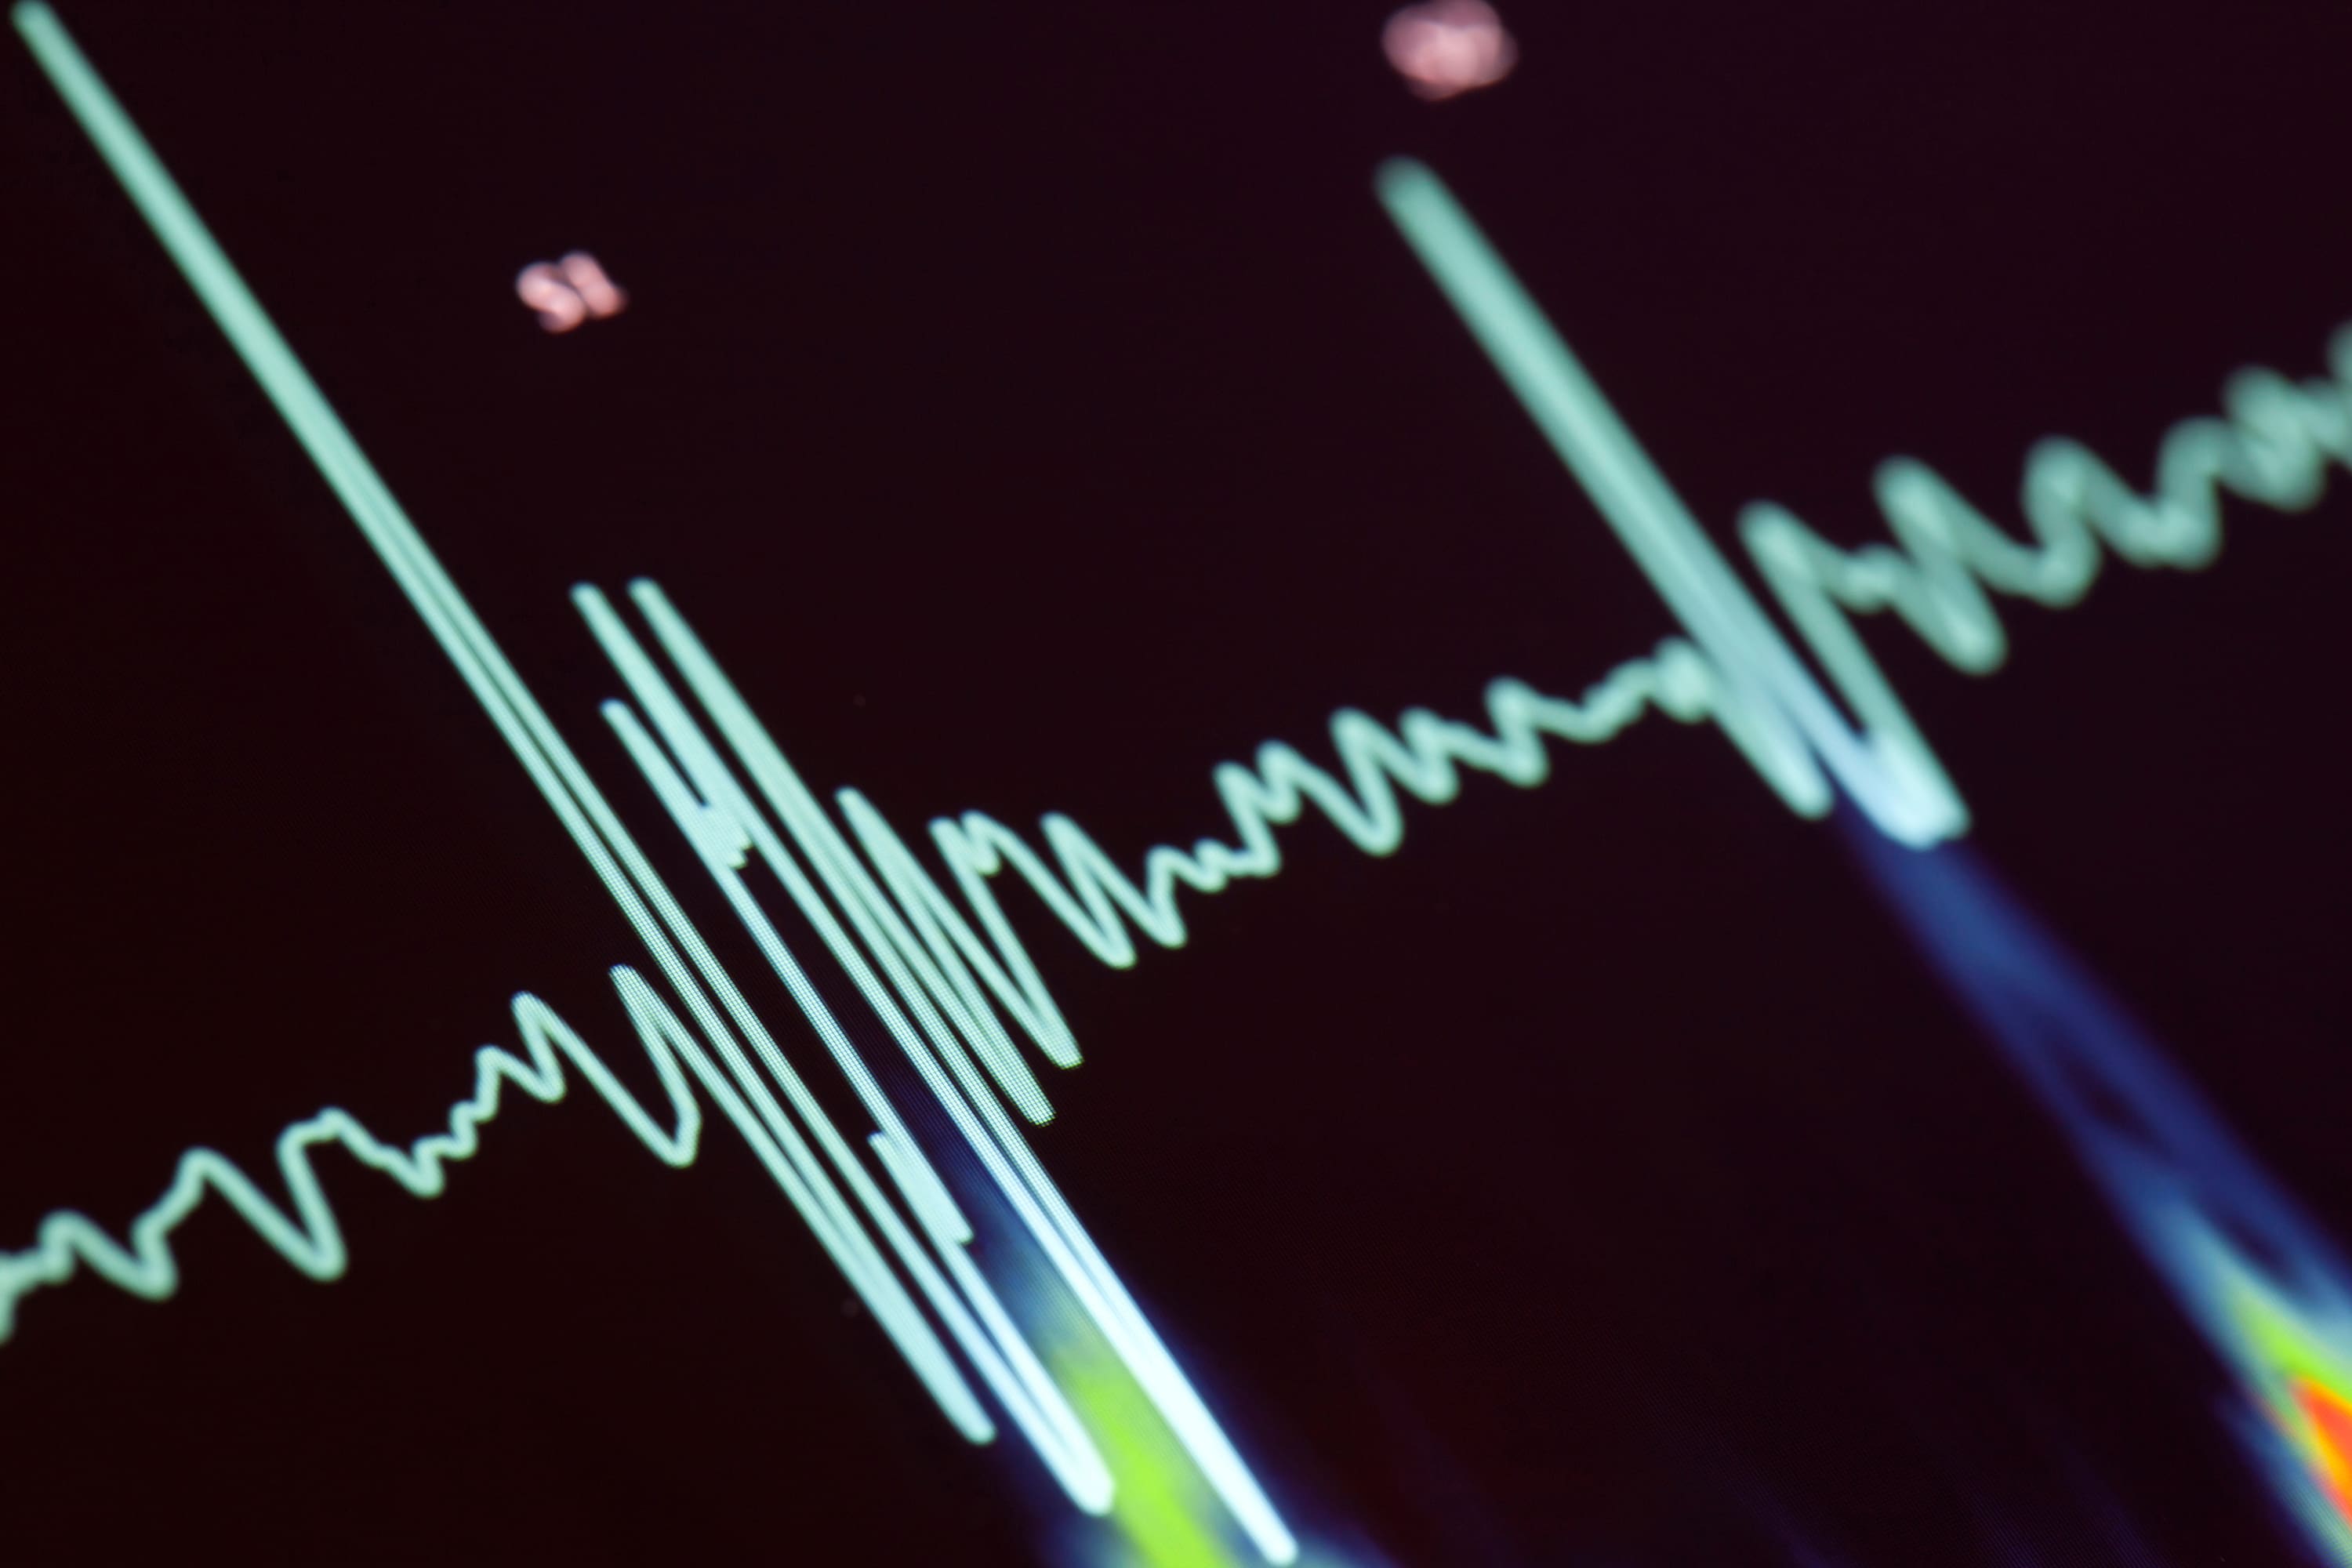 Medtech company partners with researchers to improve arrhythmia outcomes